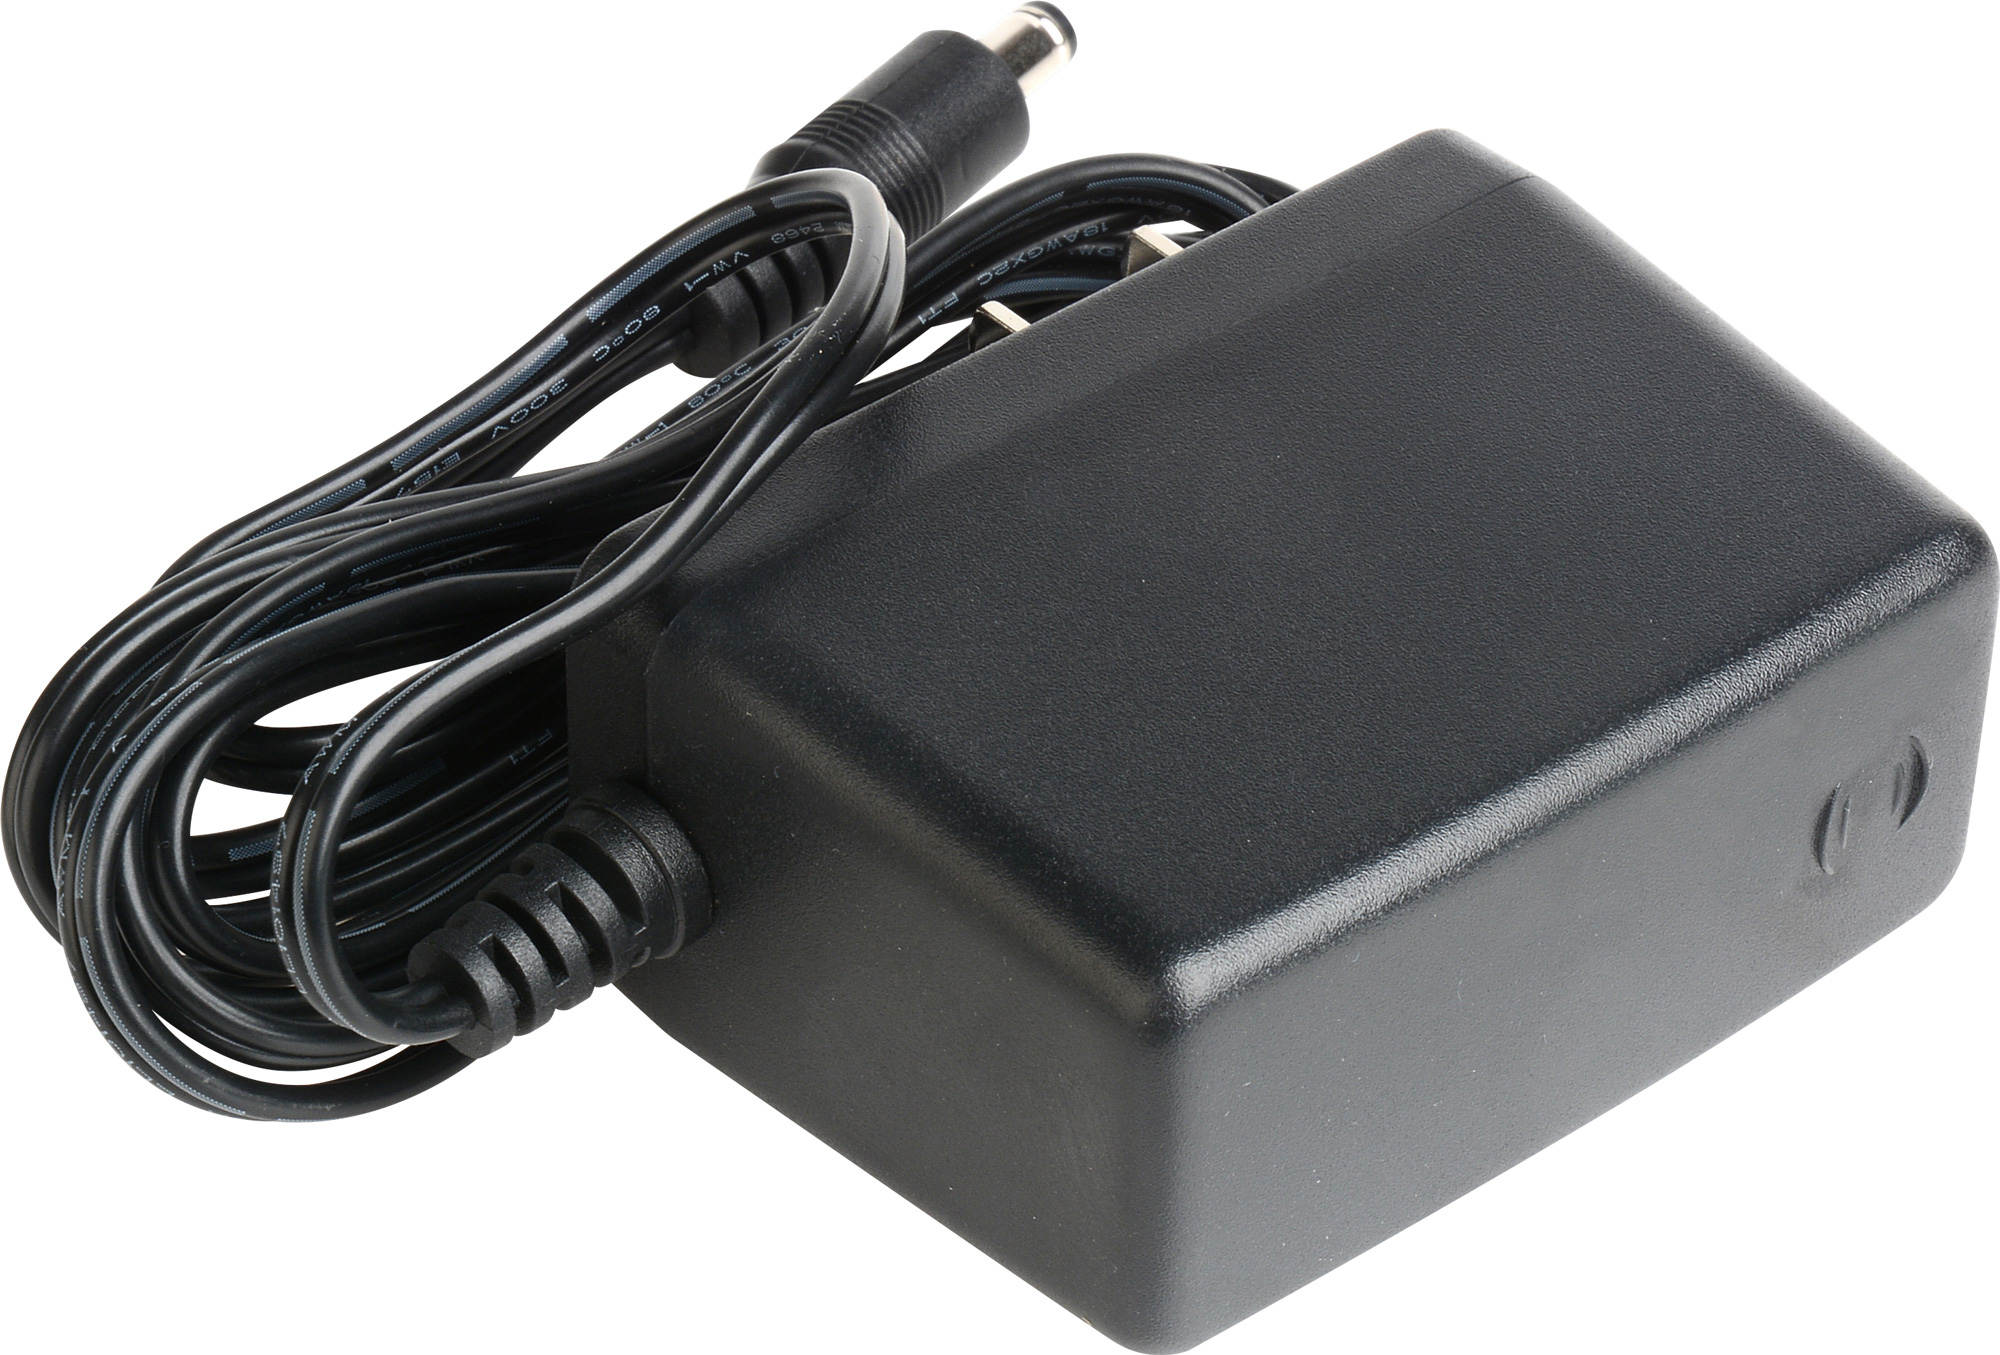 12v 2.0A AC-DC Adapter with 2.1mm Plug